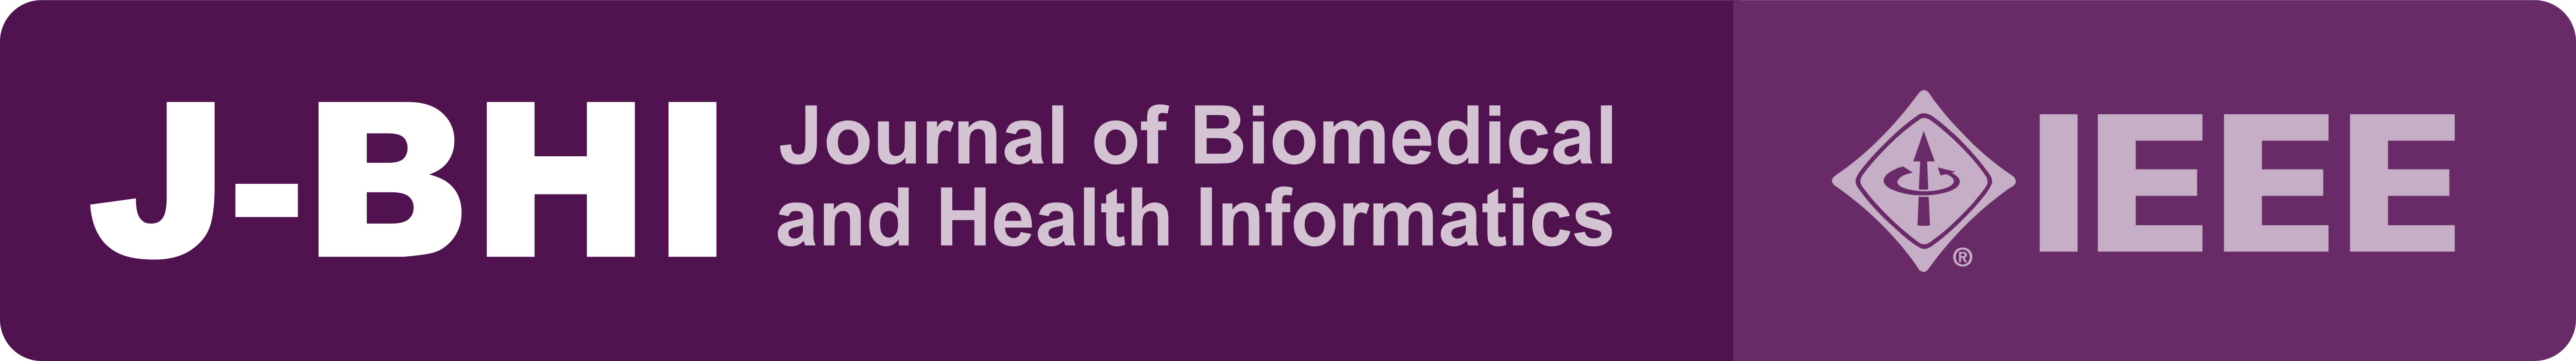  Journal of Biomedical and Health Informatics